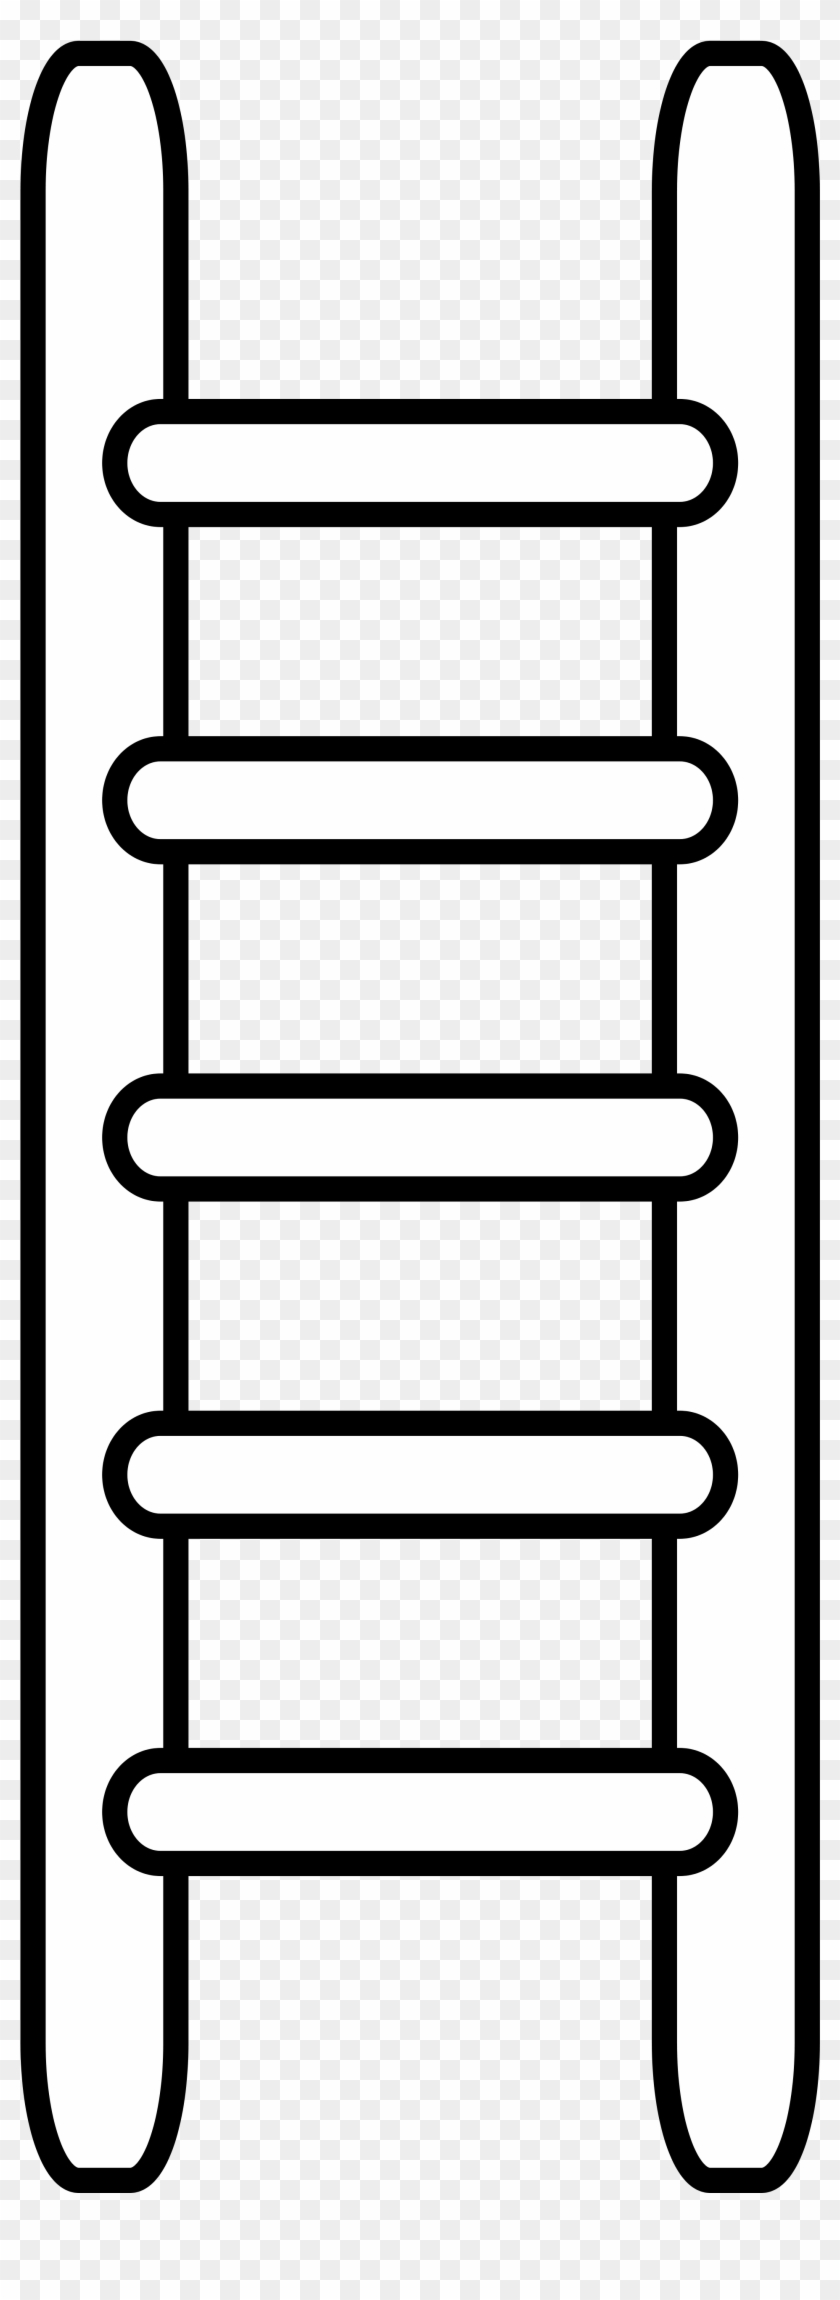 File H Raldique Meuble Echelle Wikimedia Commons - Ladder Clipart Black And White Png Transparent Png #3985369